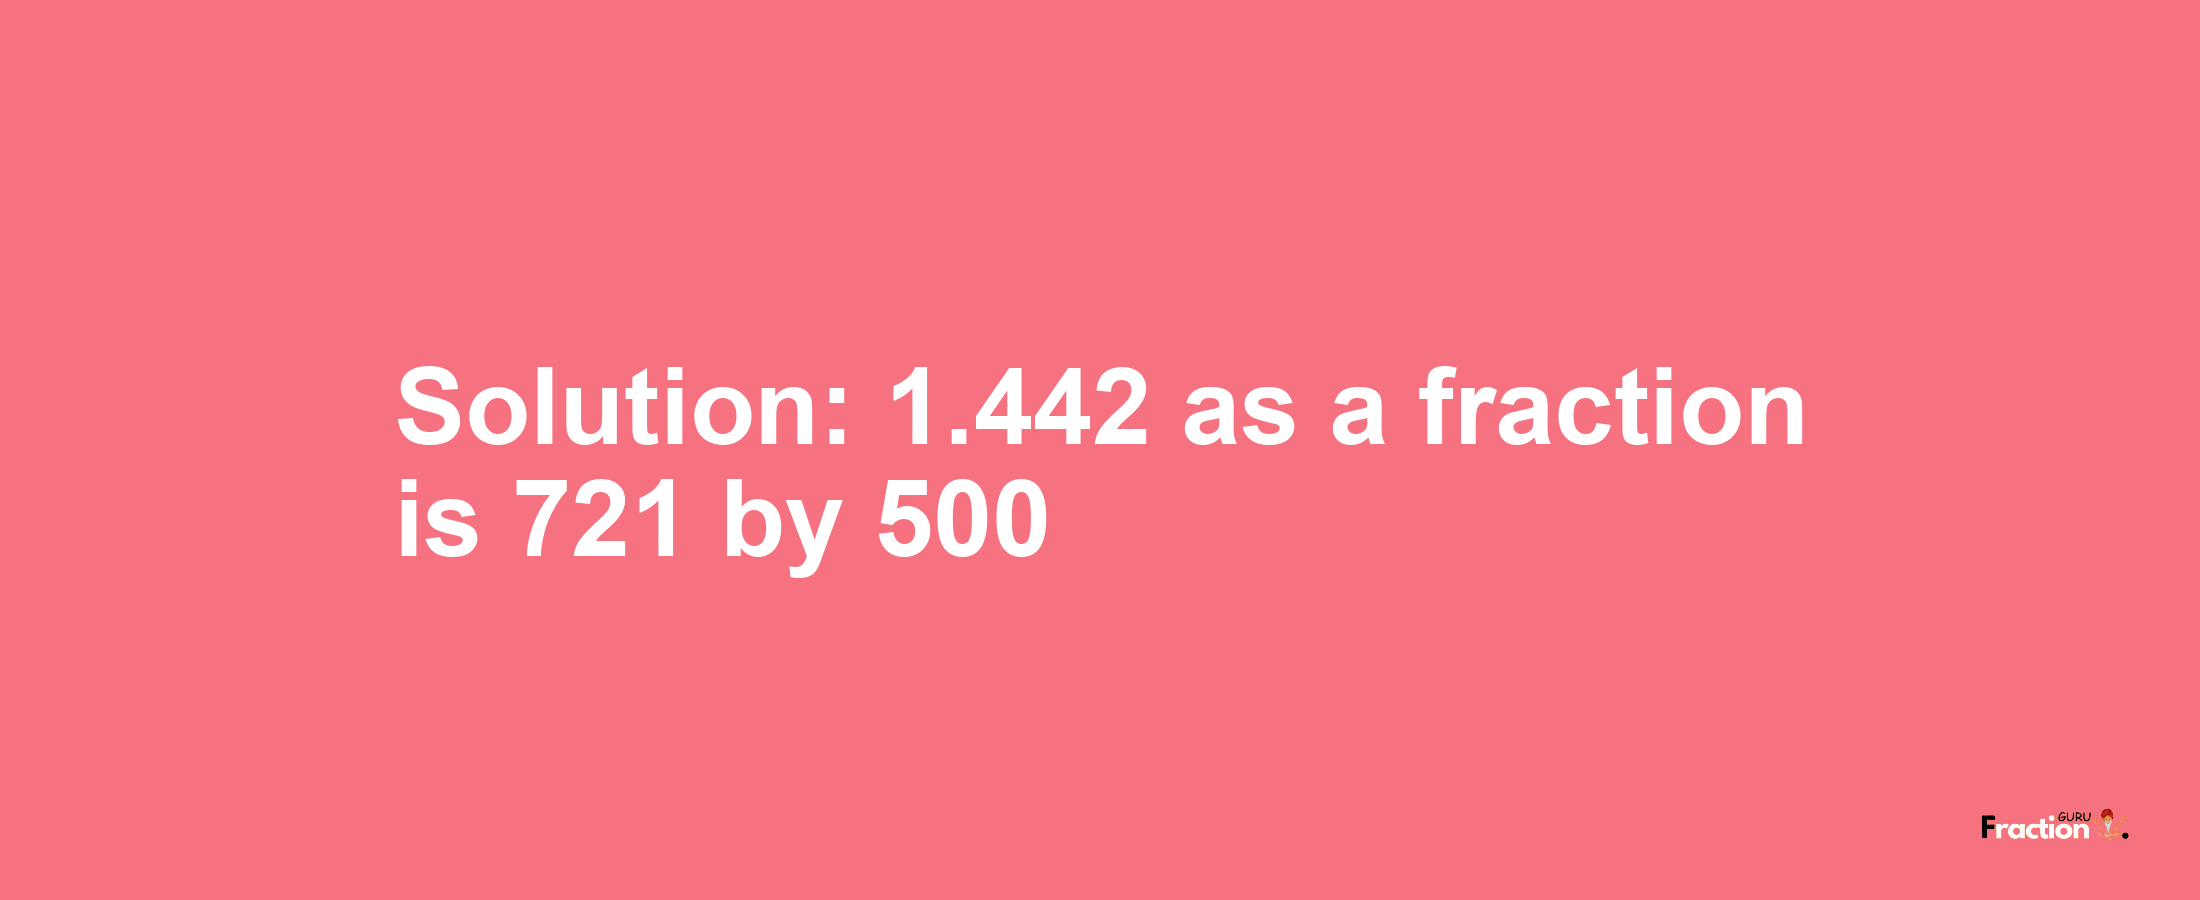 Solution:1.442 as a fraction is 721/500